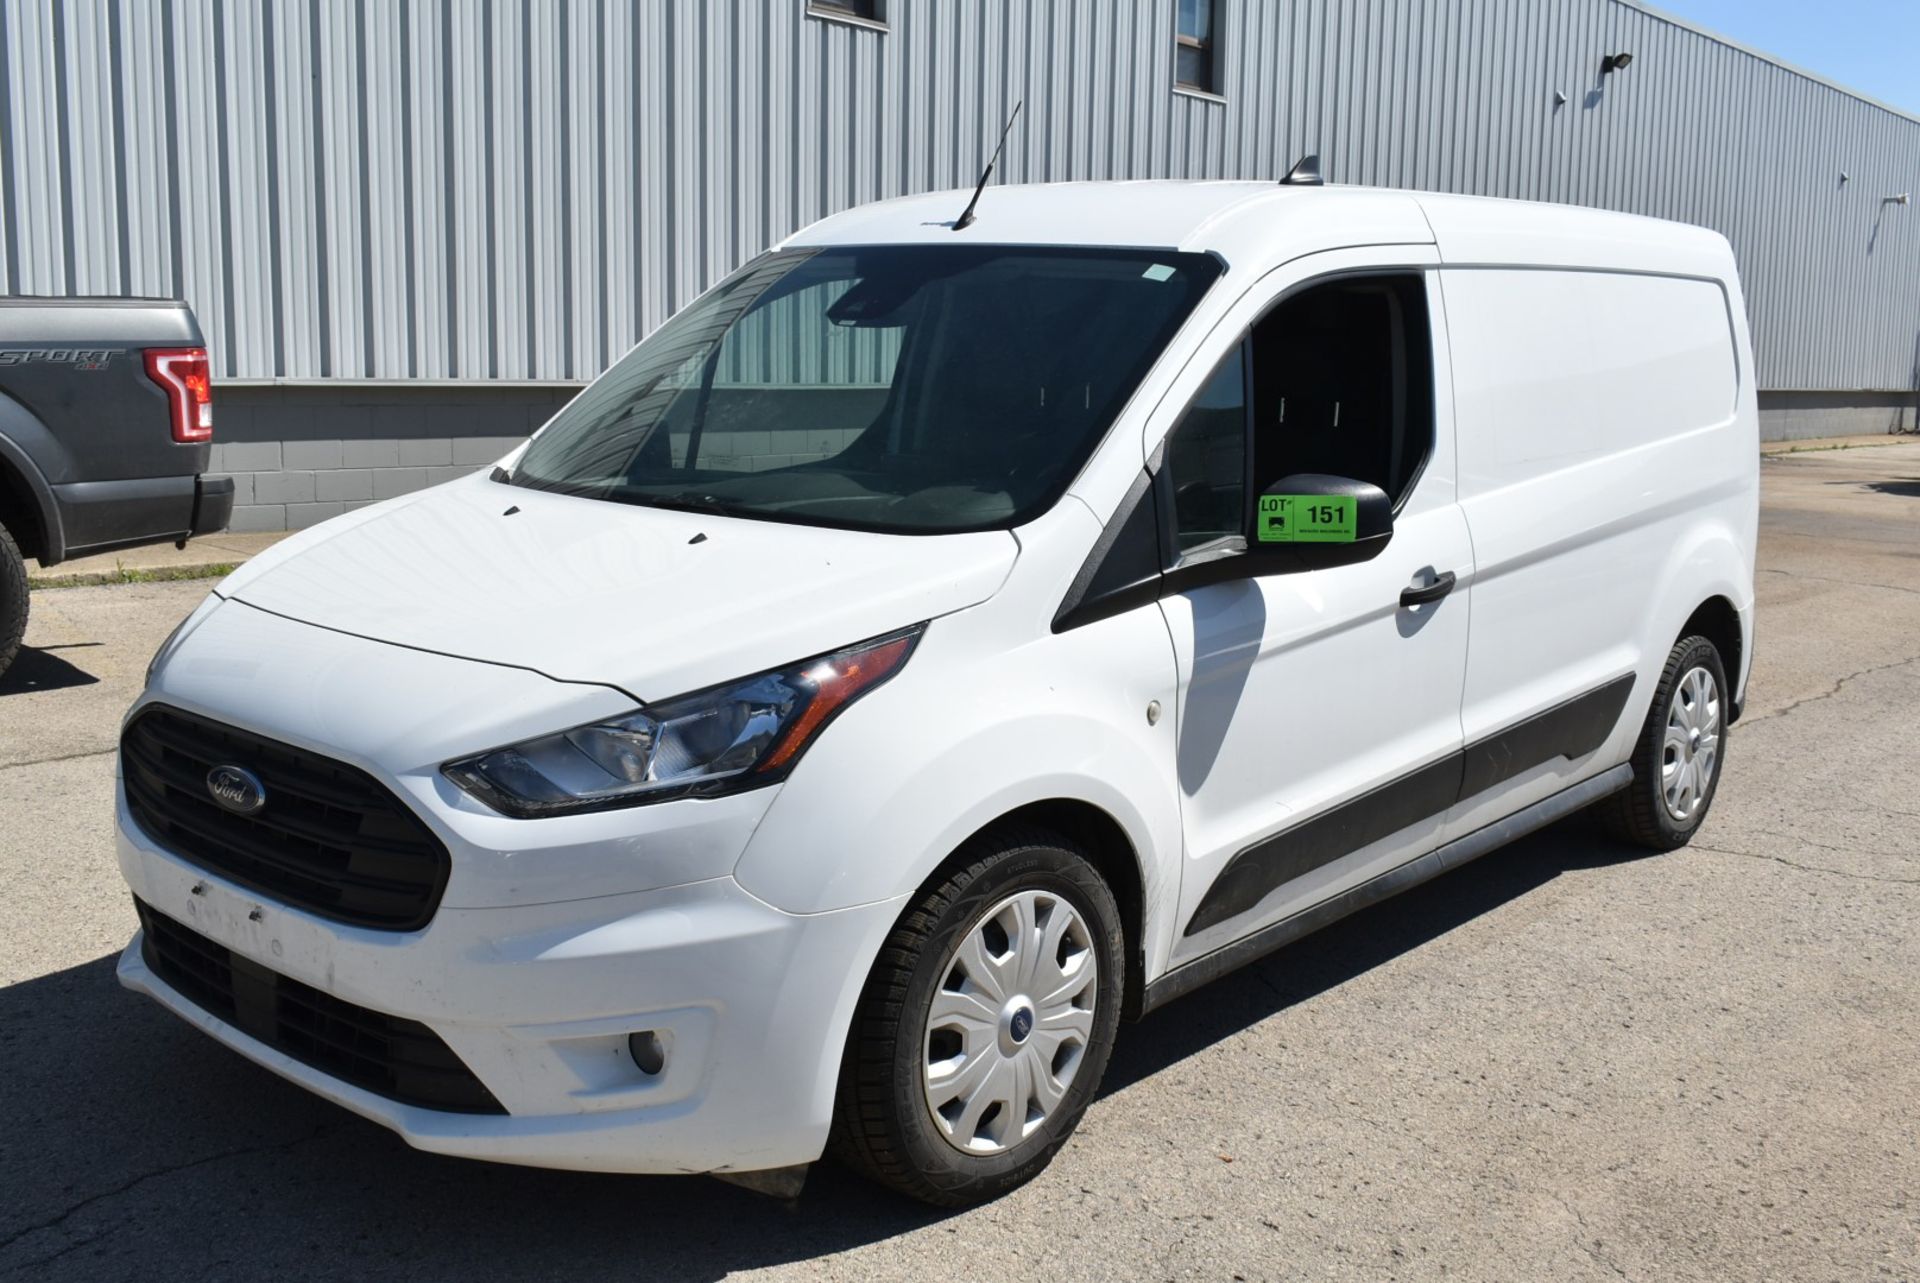 FORD (2020) TRANSIT CONNECT VAN WITH 2.0 LITER 4 CYLINDER GAS ENGINE, AUTOMATIC TRANSMISSION, FWD, - Image 2 of 14